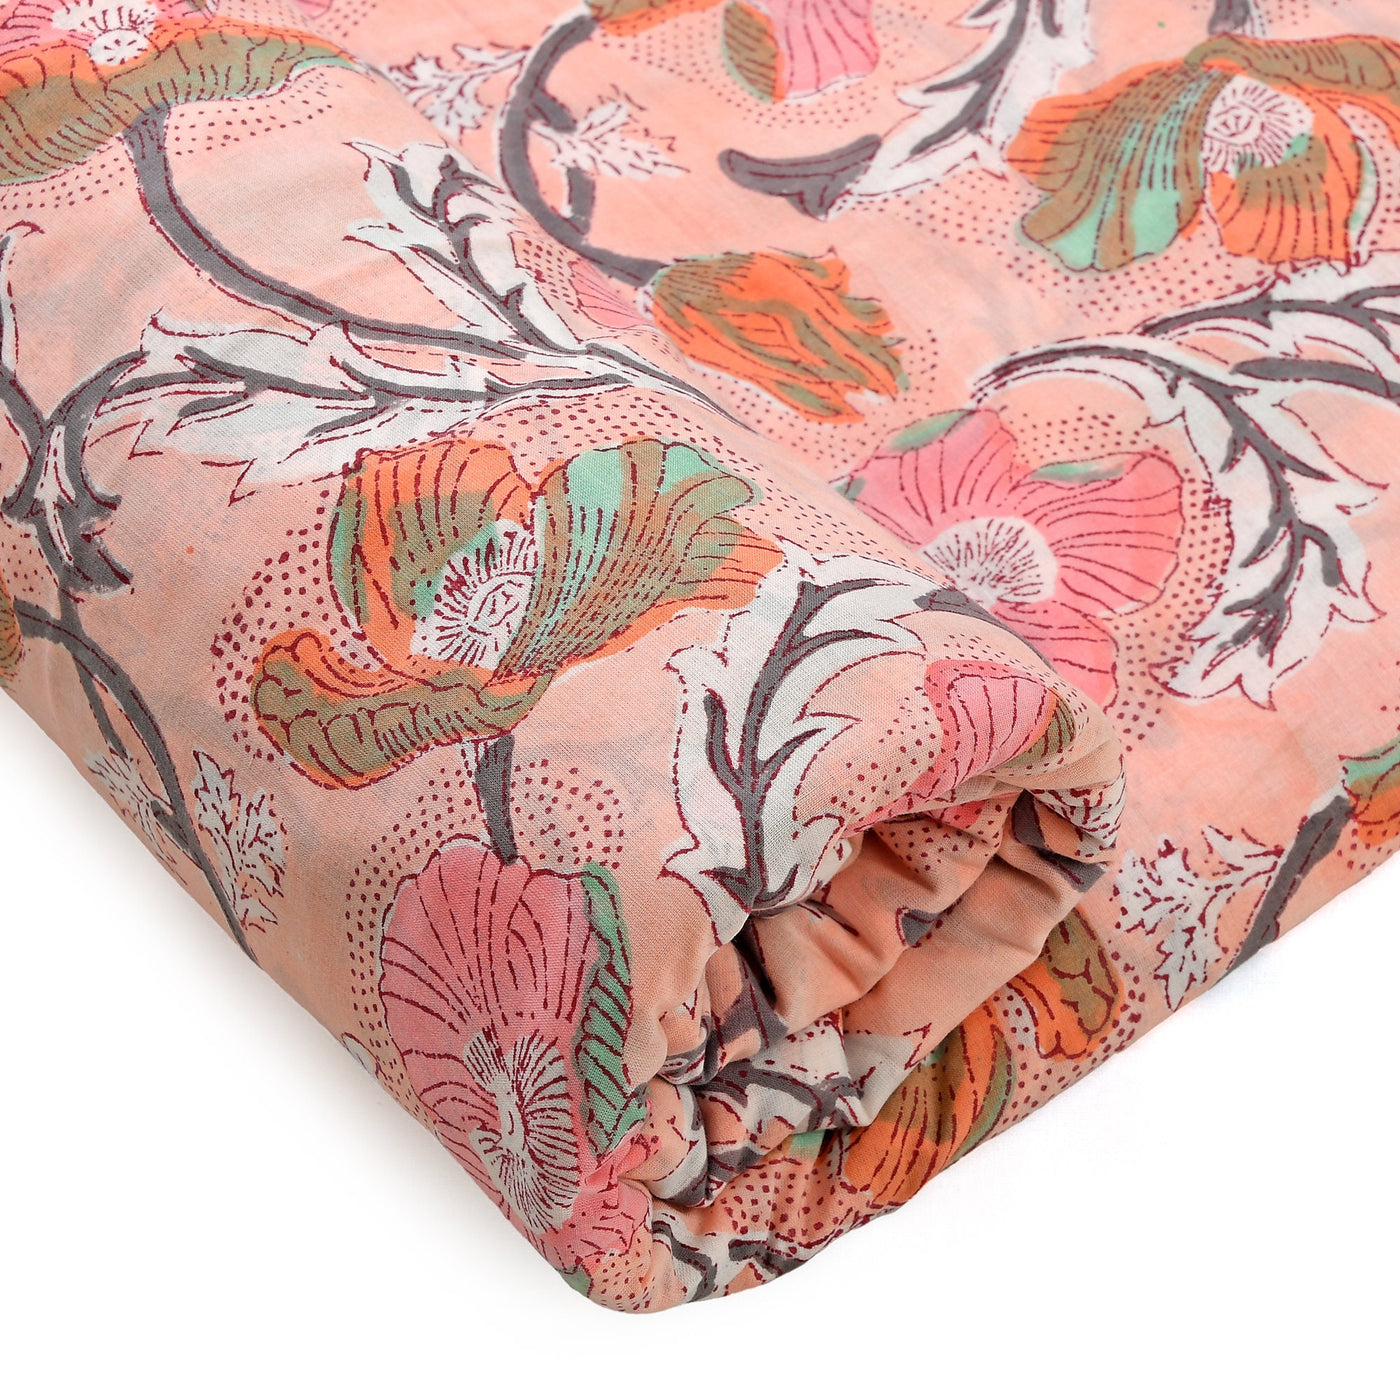 Fabricrush Salmon Pink, Teal, Grey Indian Hand Block Floral Printed 100% Pure Cotton Cloth, Lightweight Summer Fabric for Curtains Women's Dresses Bags